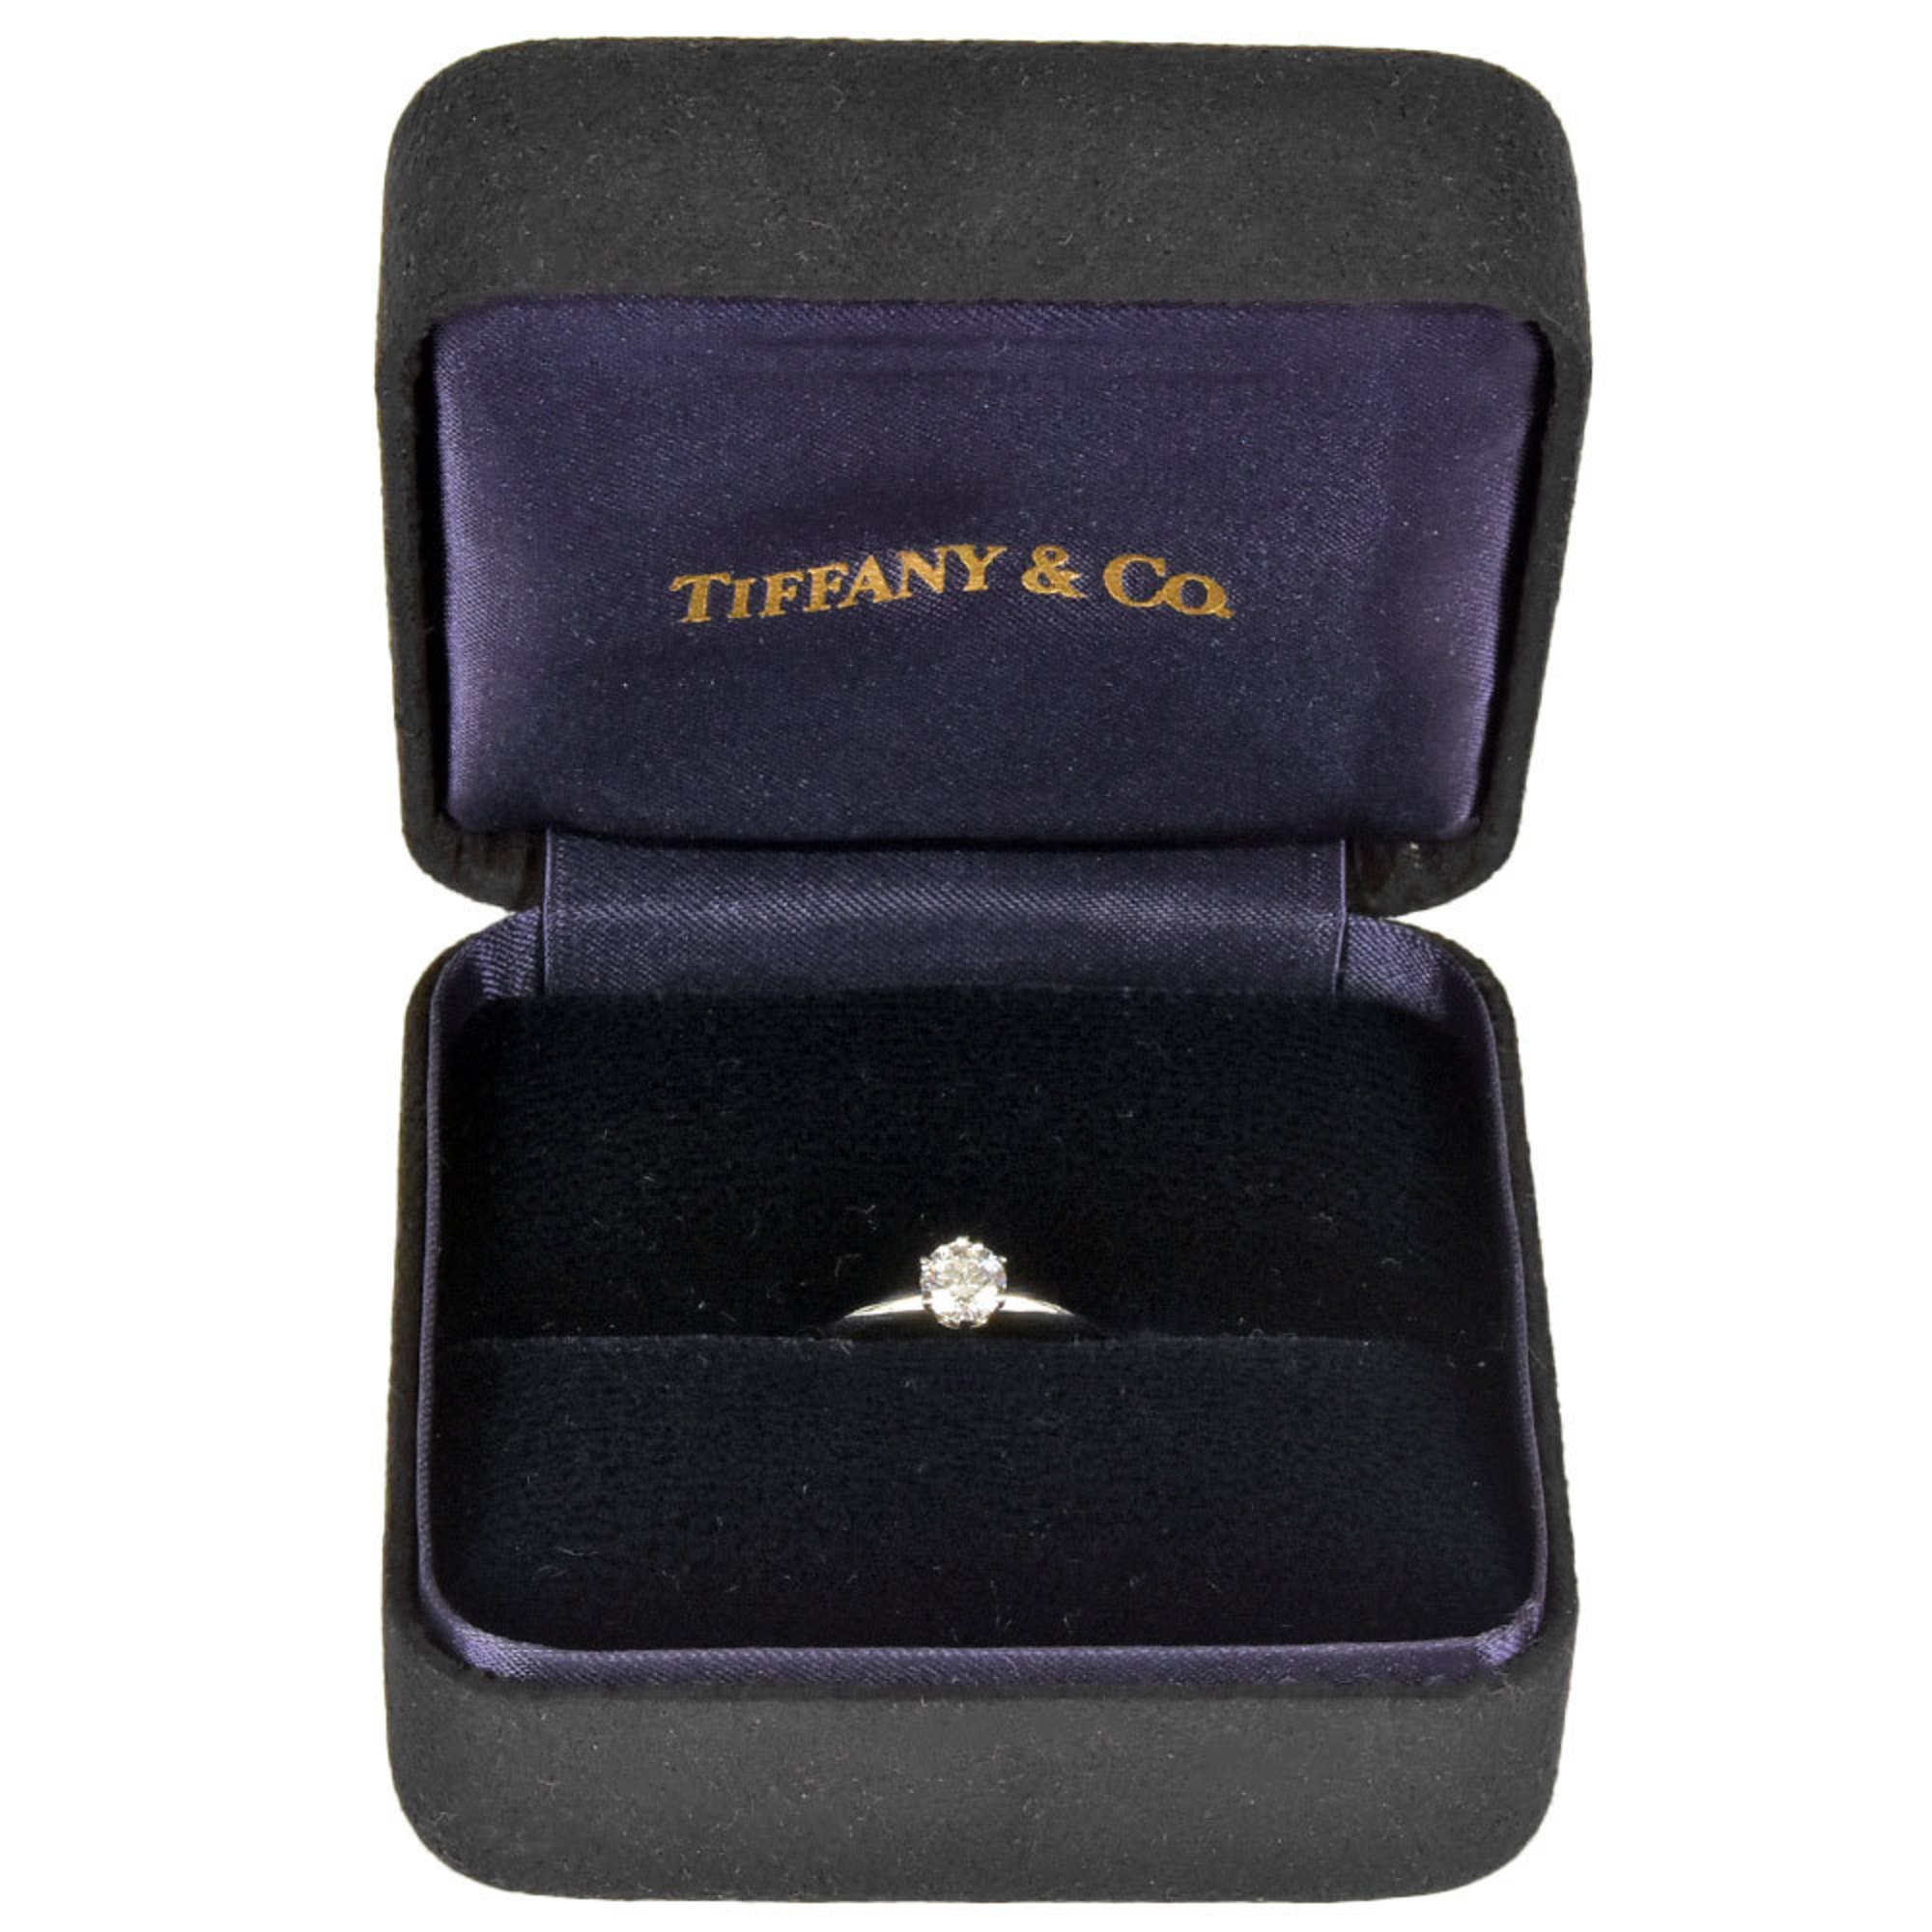 Tiffany & Co. Solitaire Ring, Diamond, 0.54ct, Size 11, Pt950, 4.0g, Women's